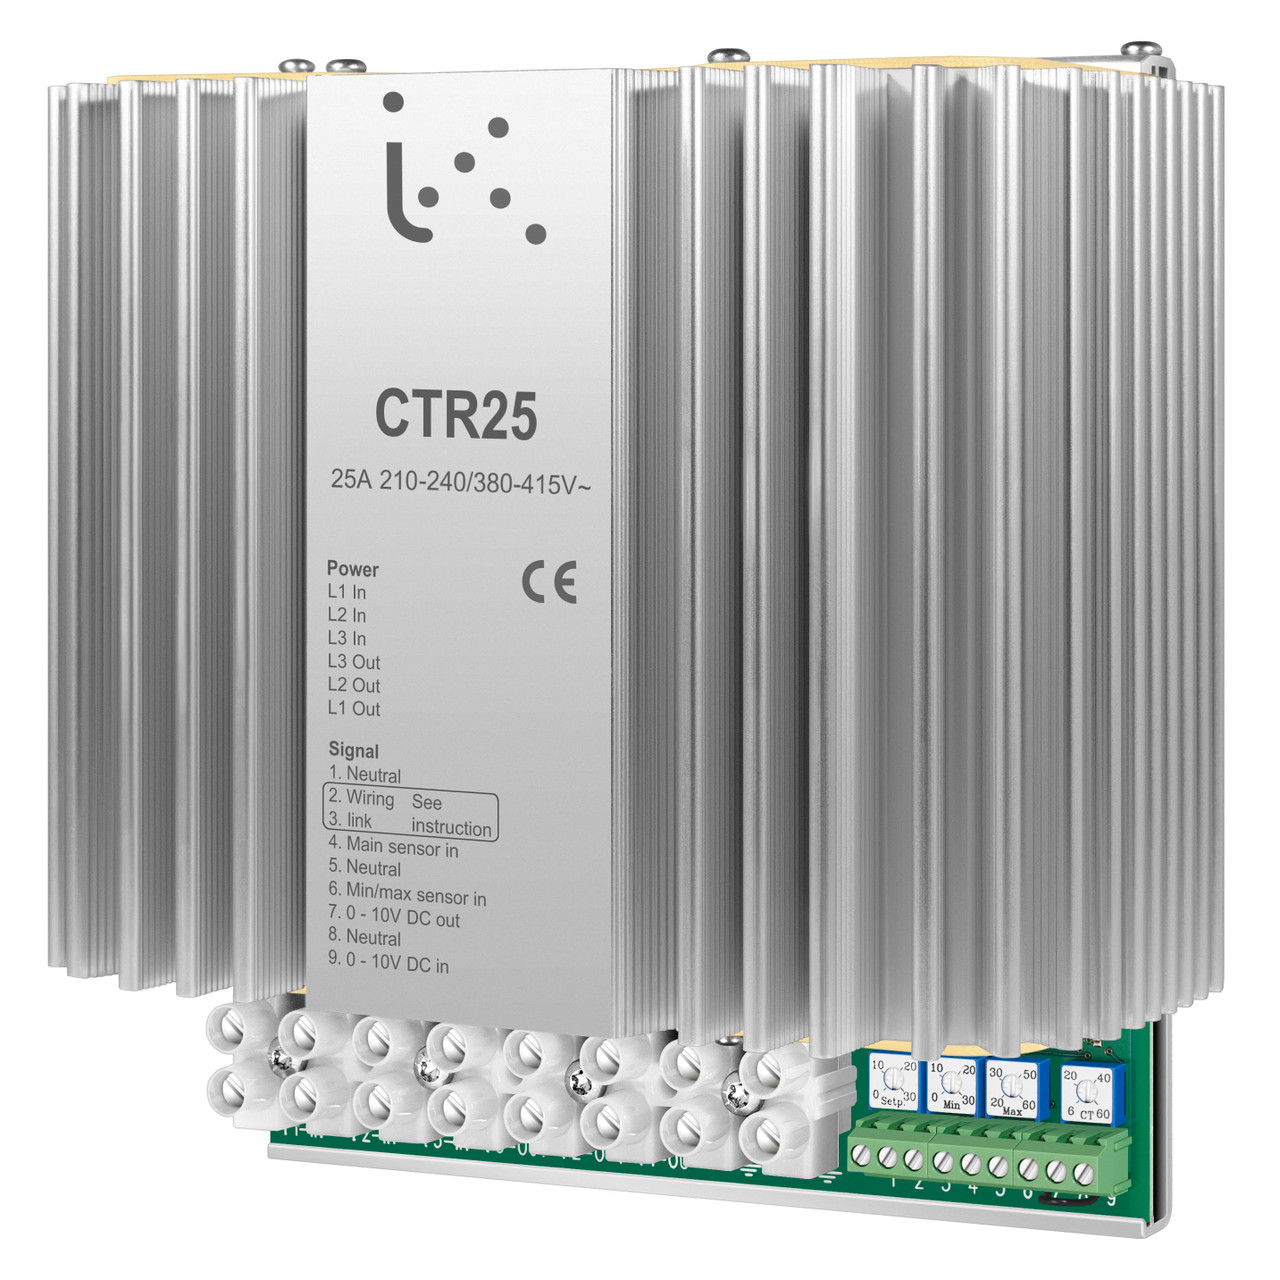 CTR25 Electric Heating Controller For Din Rail Mounting 3 Phase 210415 V 25 A P12164